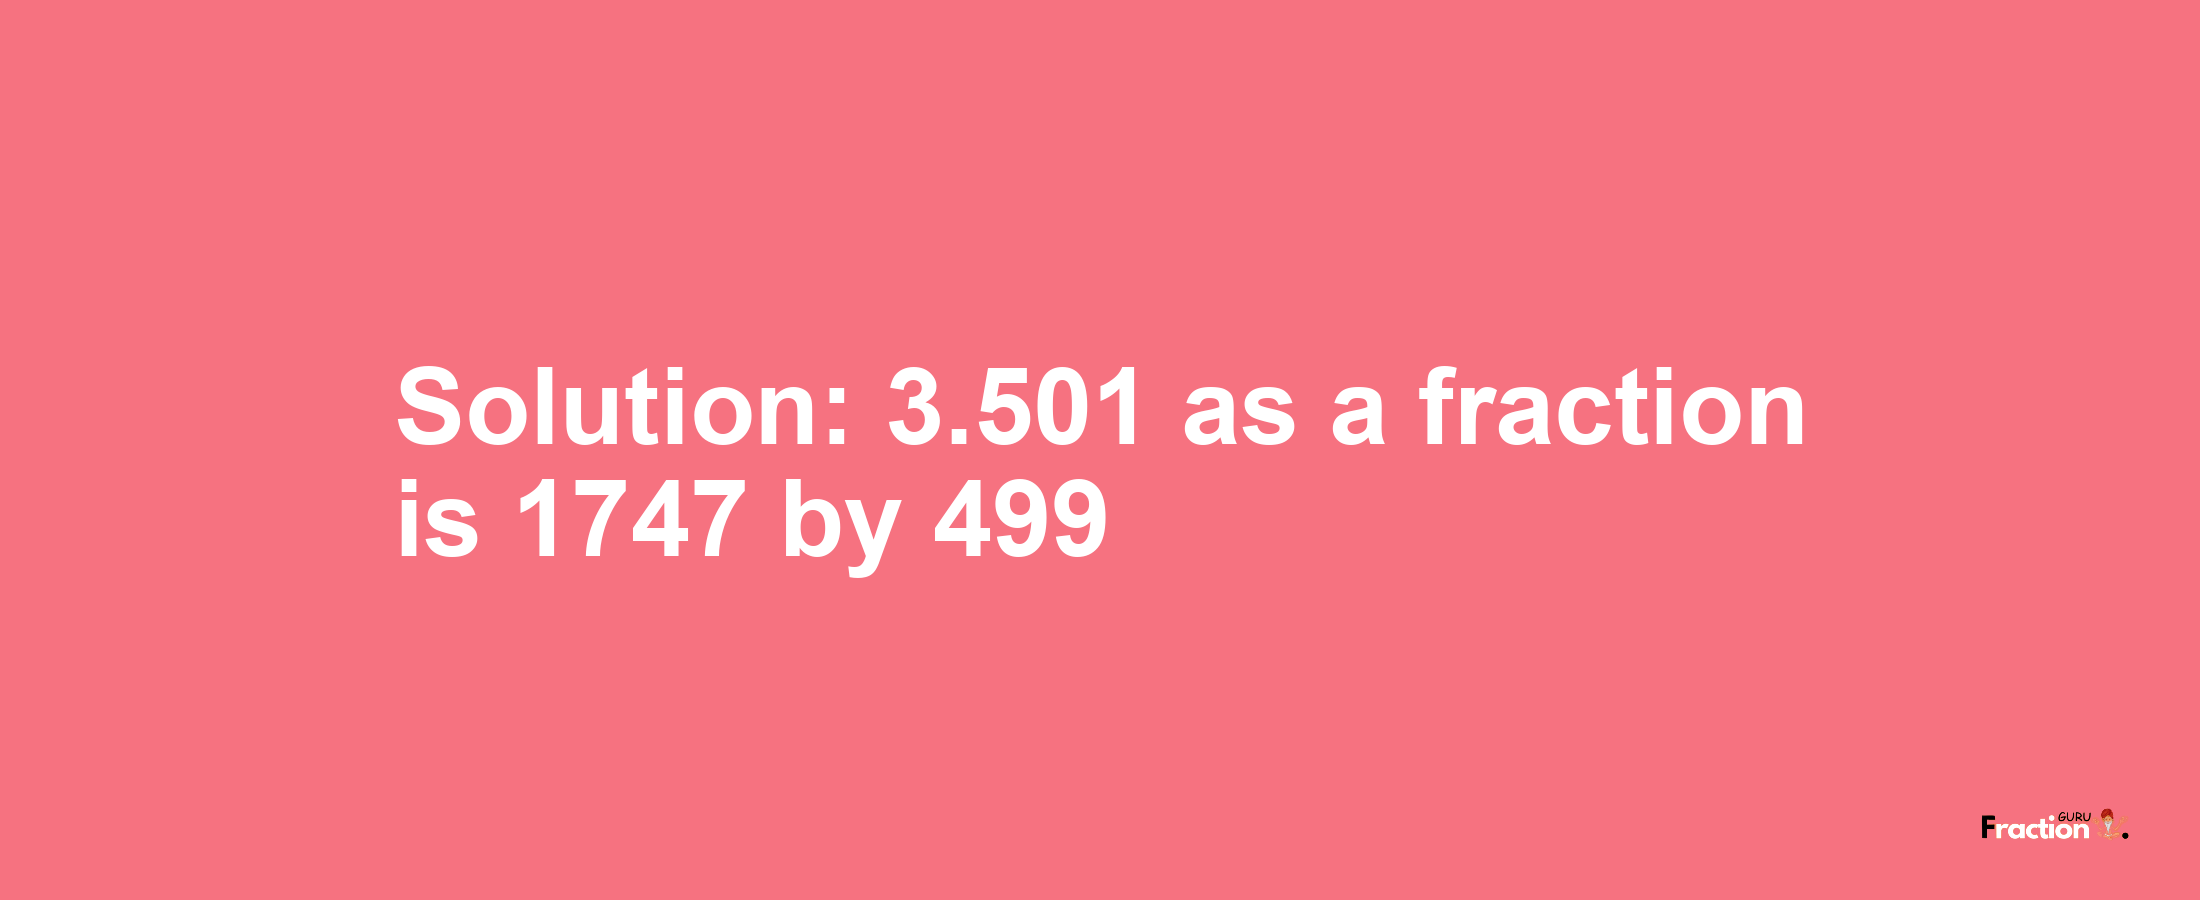 Solution:3.501 as a fraction is 1747/499